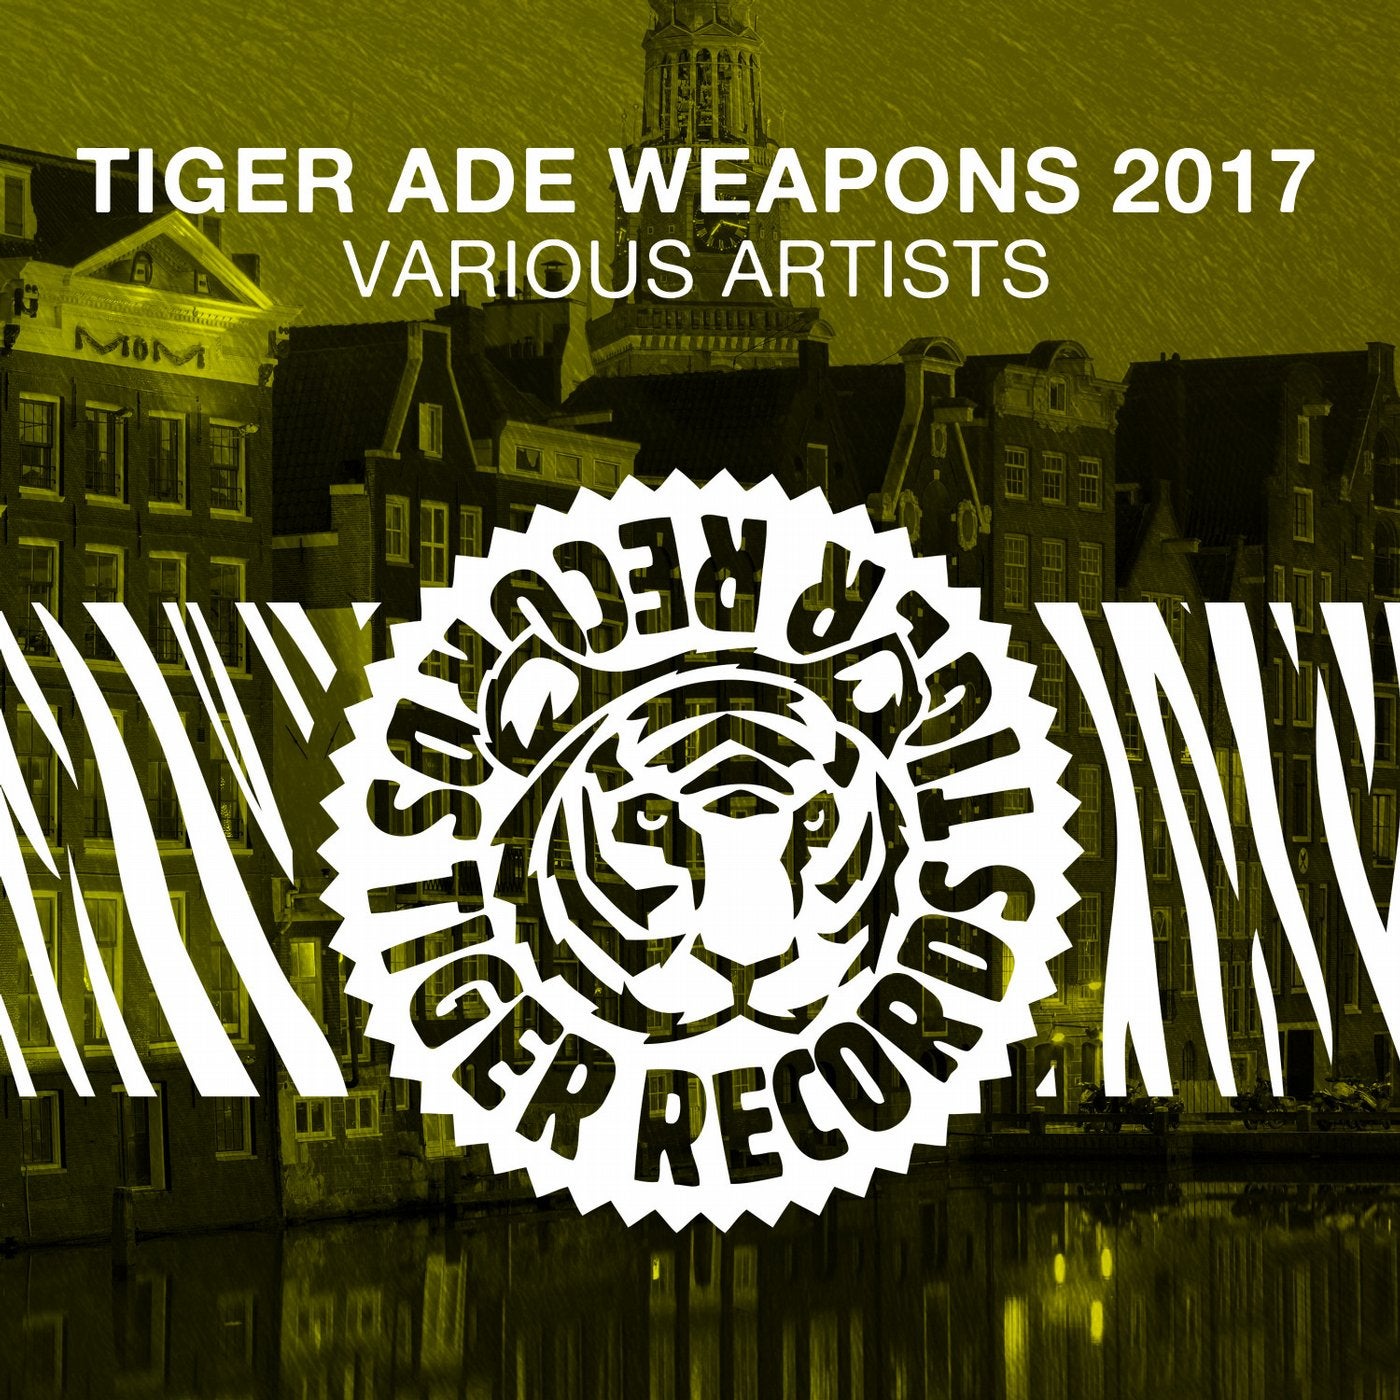 Tiger ADE Weapons 2017